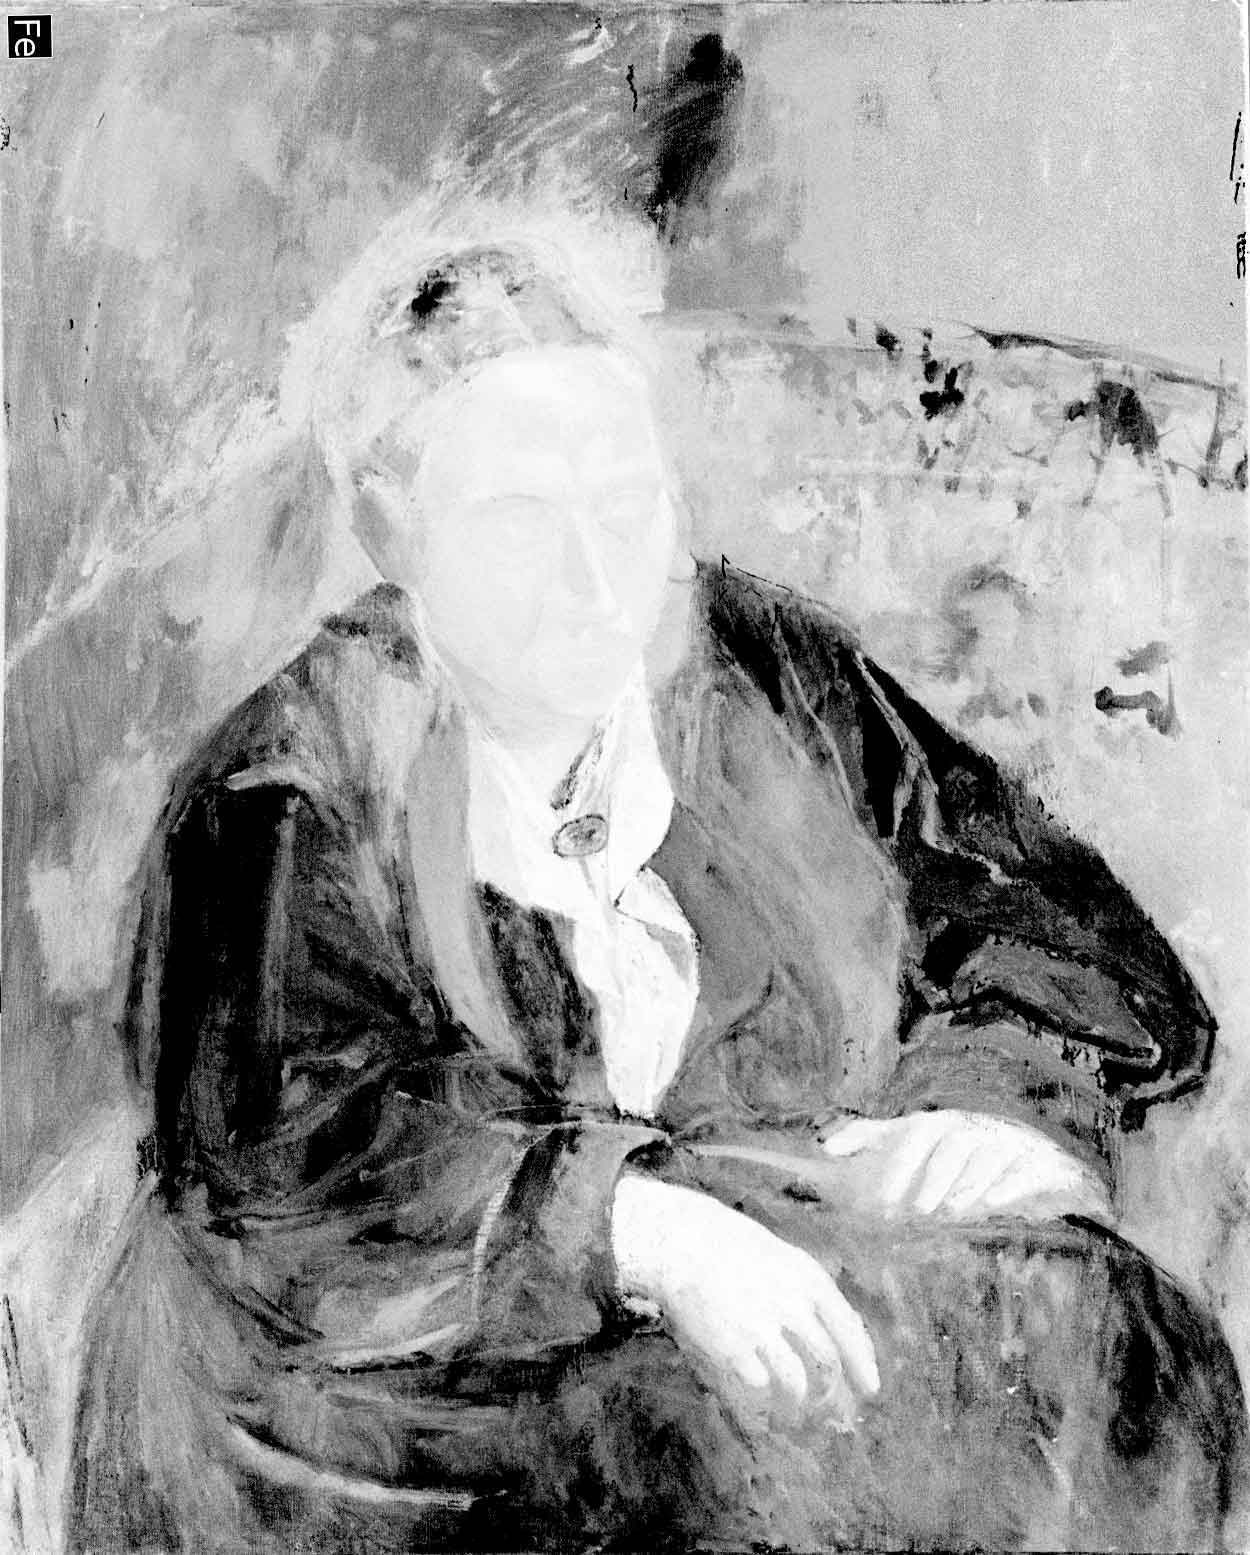 Black-and-white image of entire painting showing previous blurry stages